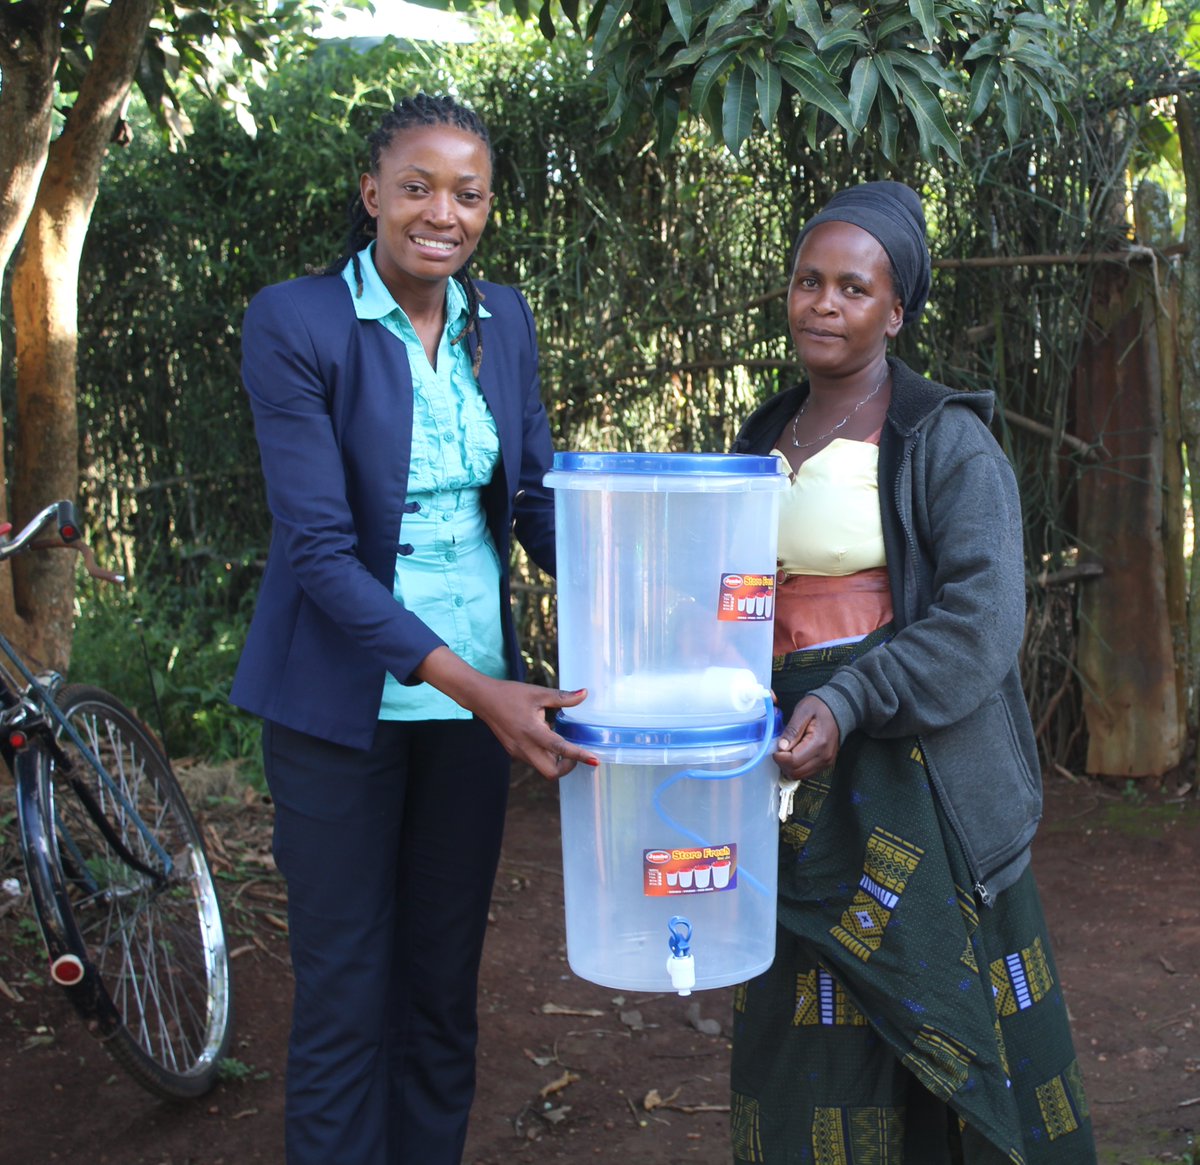 As part of improving the livelihoods of Rwandans, we also took the occasion of training and distributing water filtration kits to our project participants so that they can have access to clean water.
#FoodSecurity #Nutrition #SmallholderFarmer